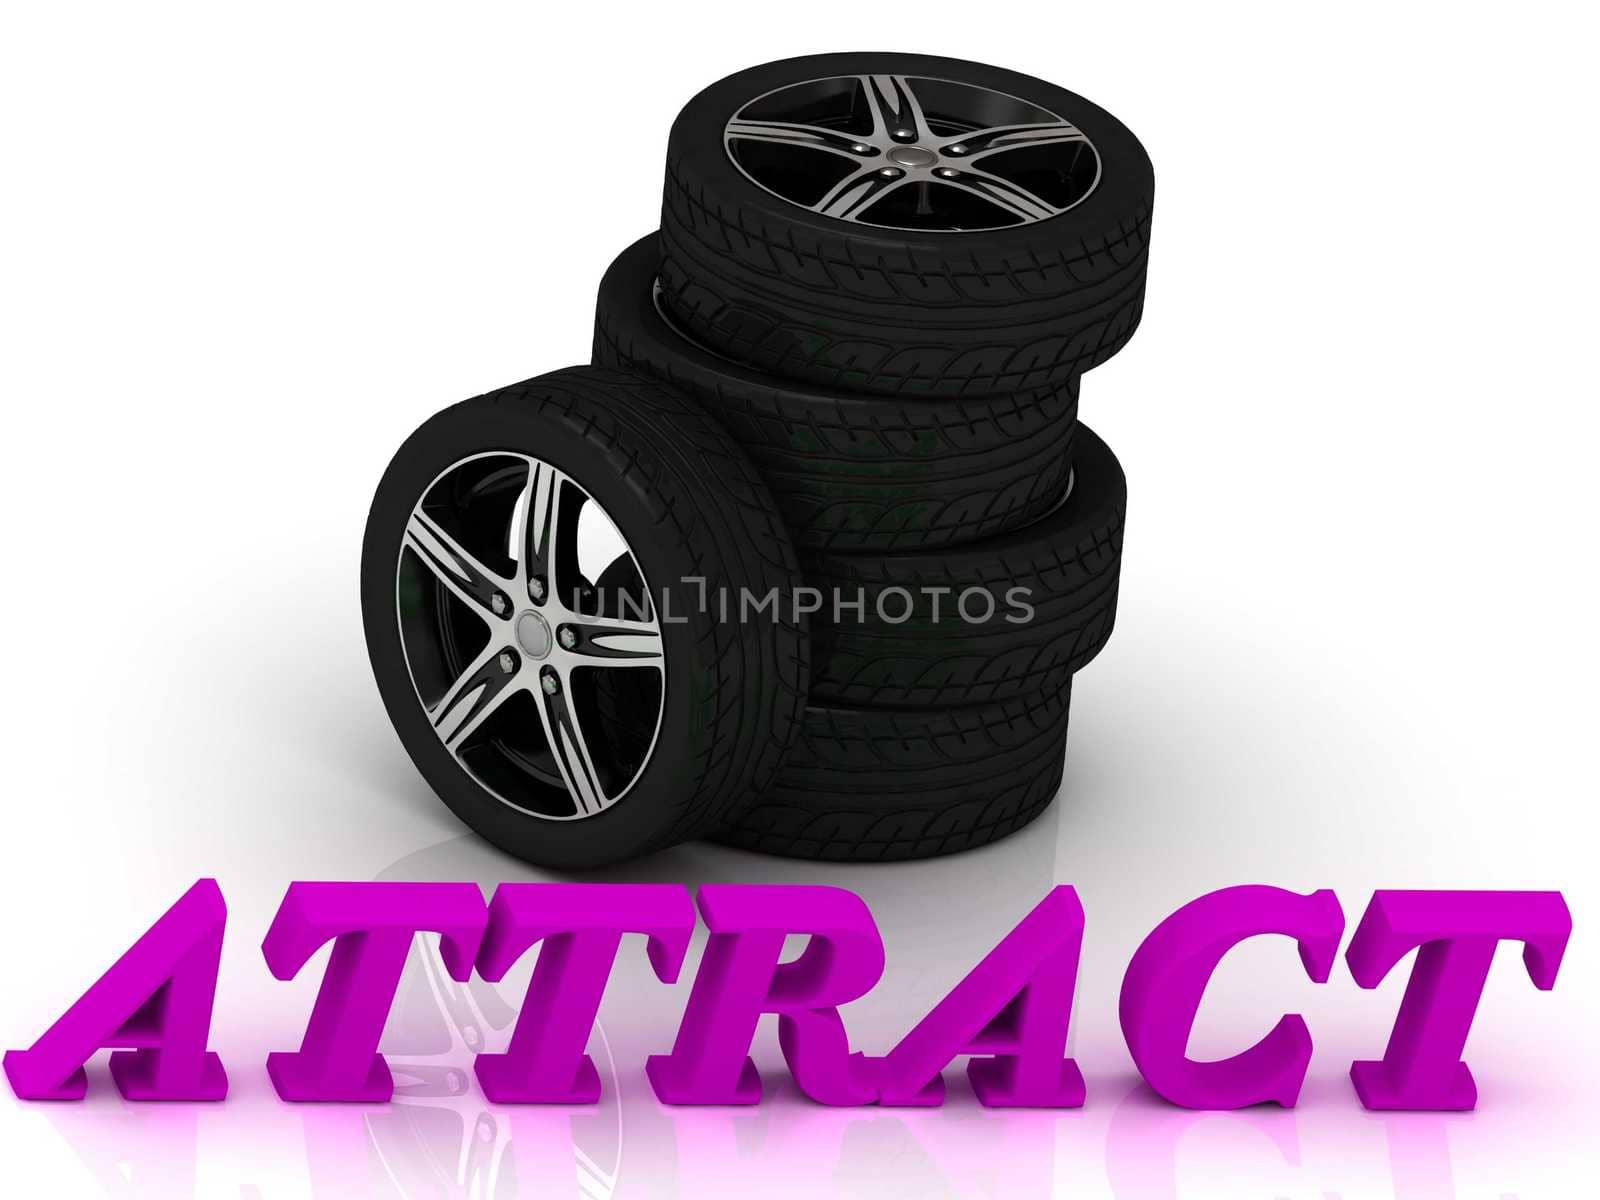 ATTRACT- bright letters and rims mashine black wheels by GreenMost